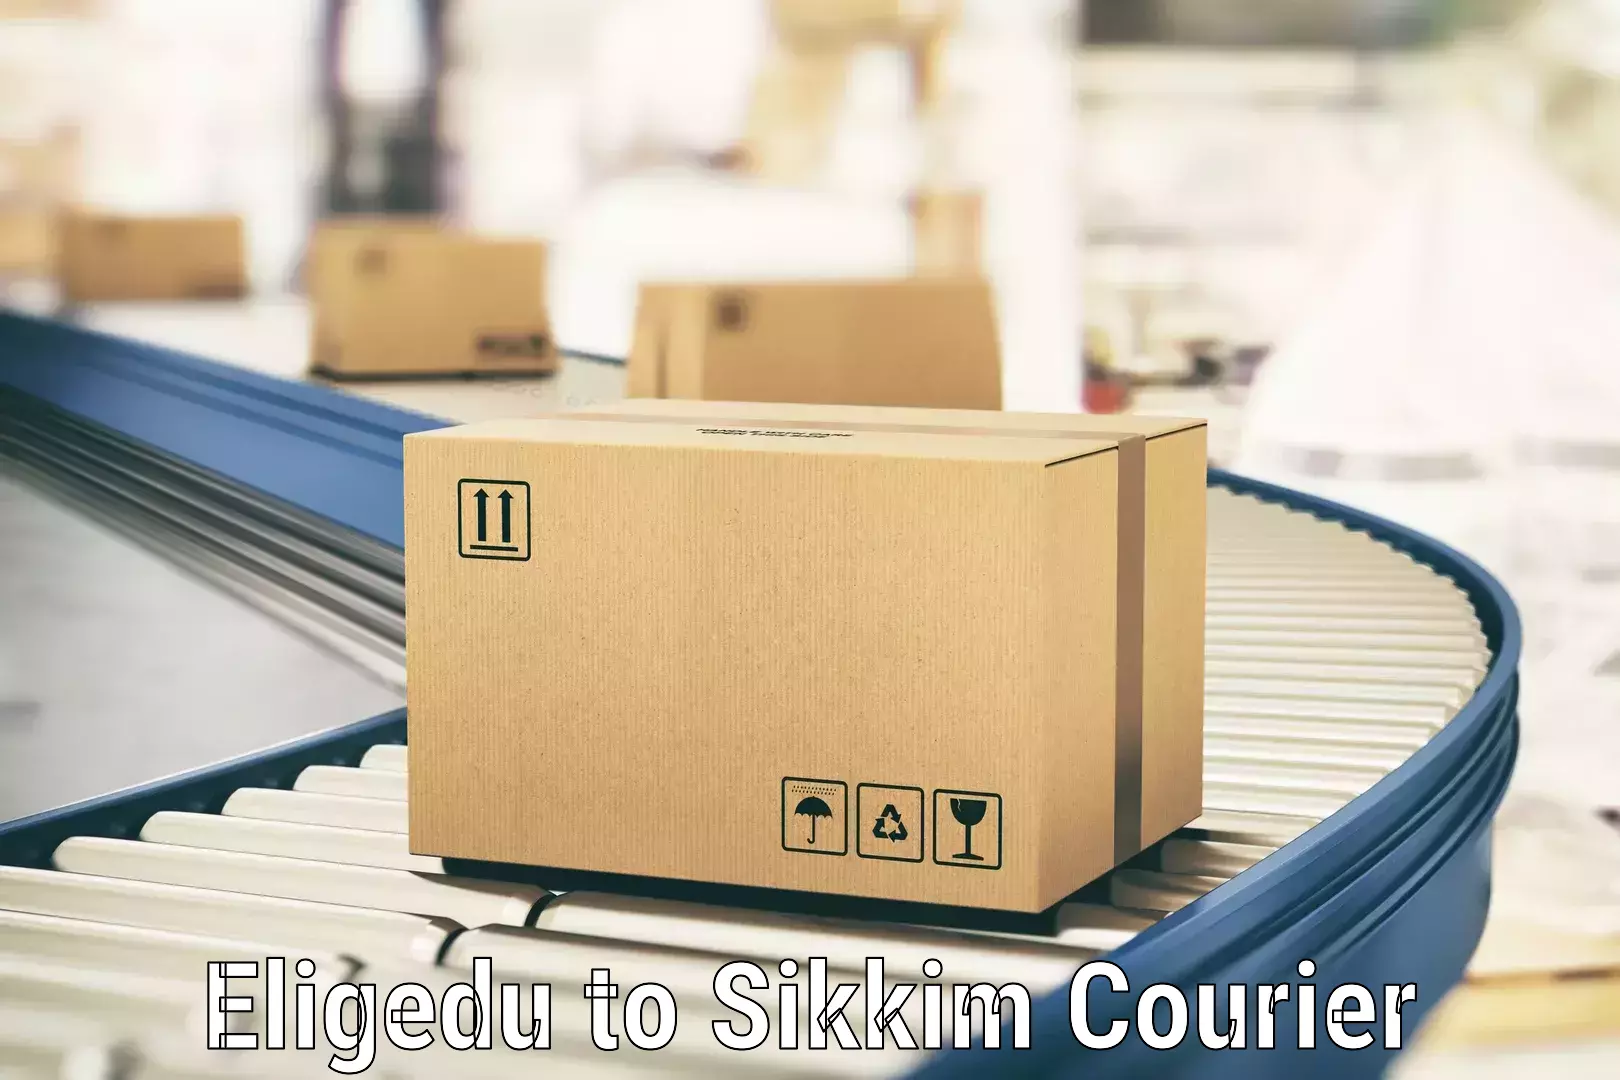 Flexible courier rates Eligedu to Sikkim